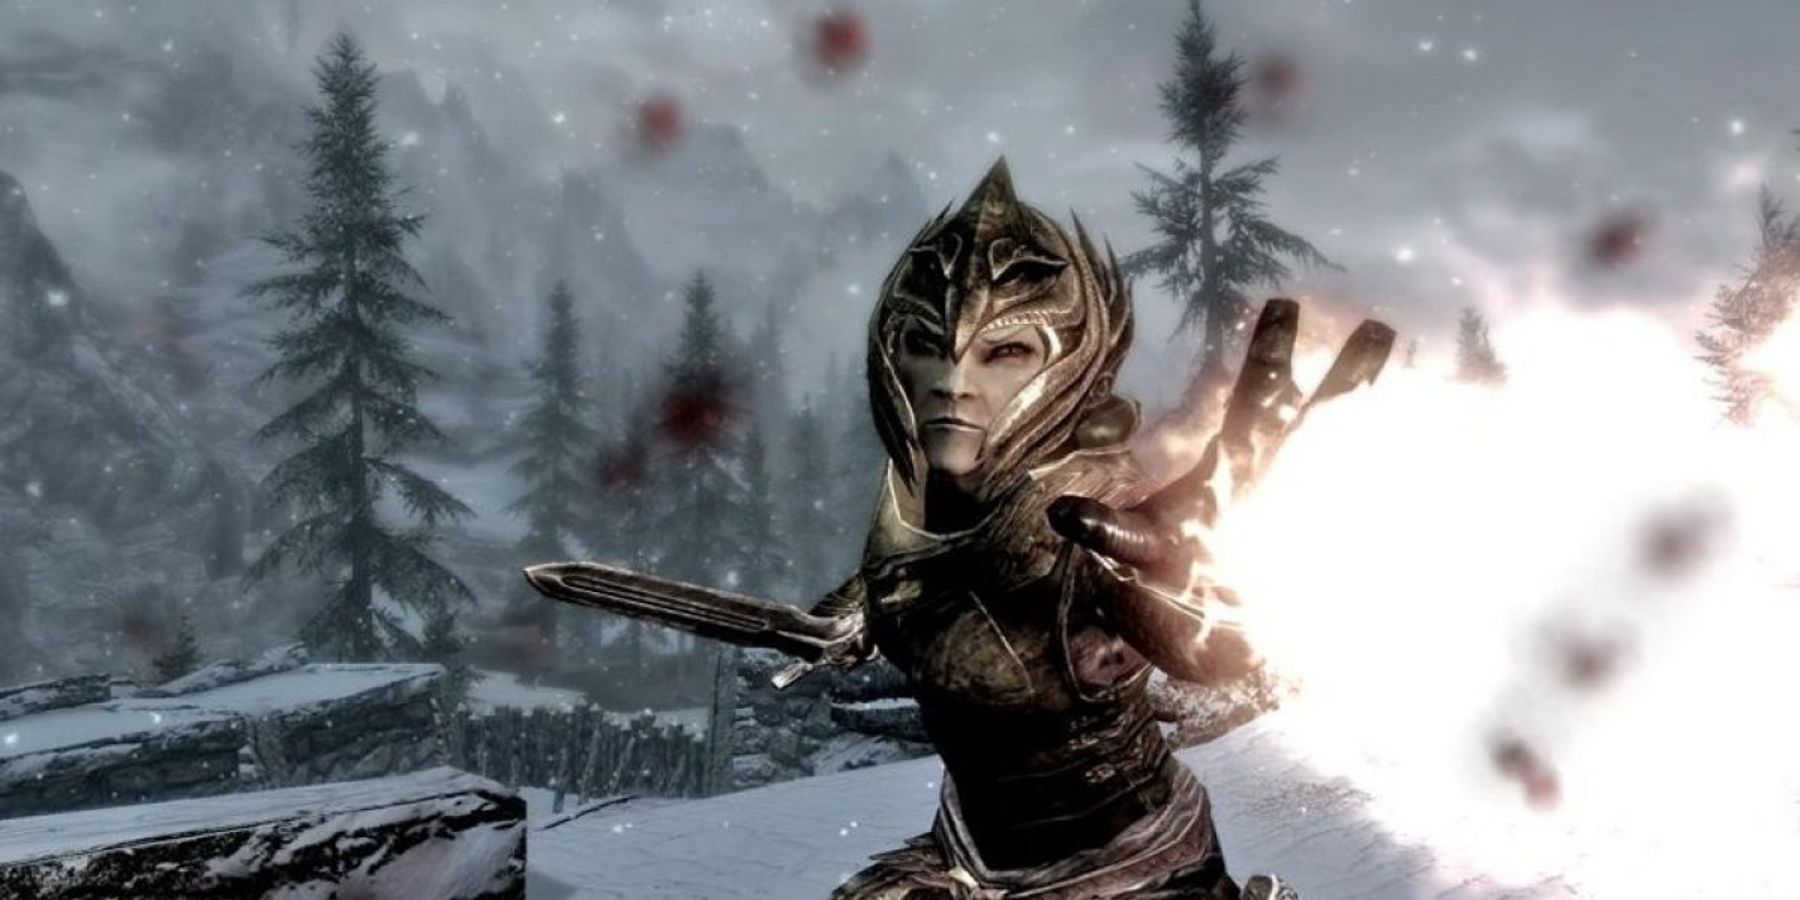 The Elder Scrolls 6 level-up system will be similar to Skyrim's